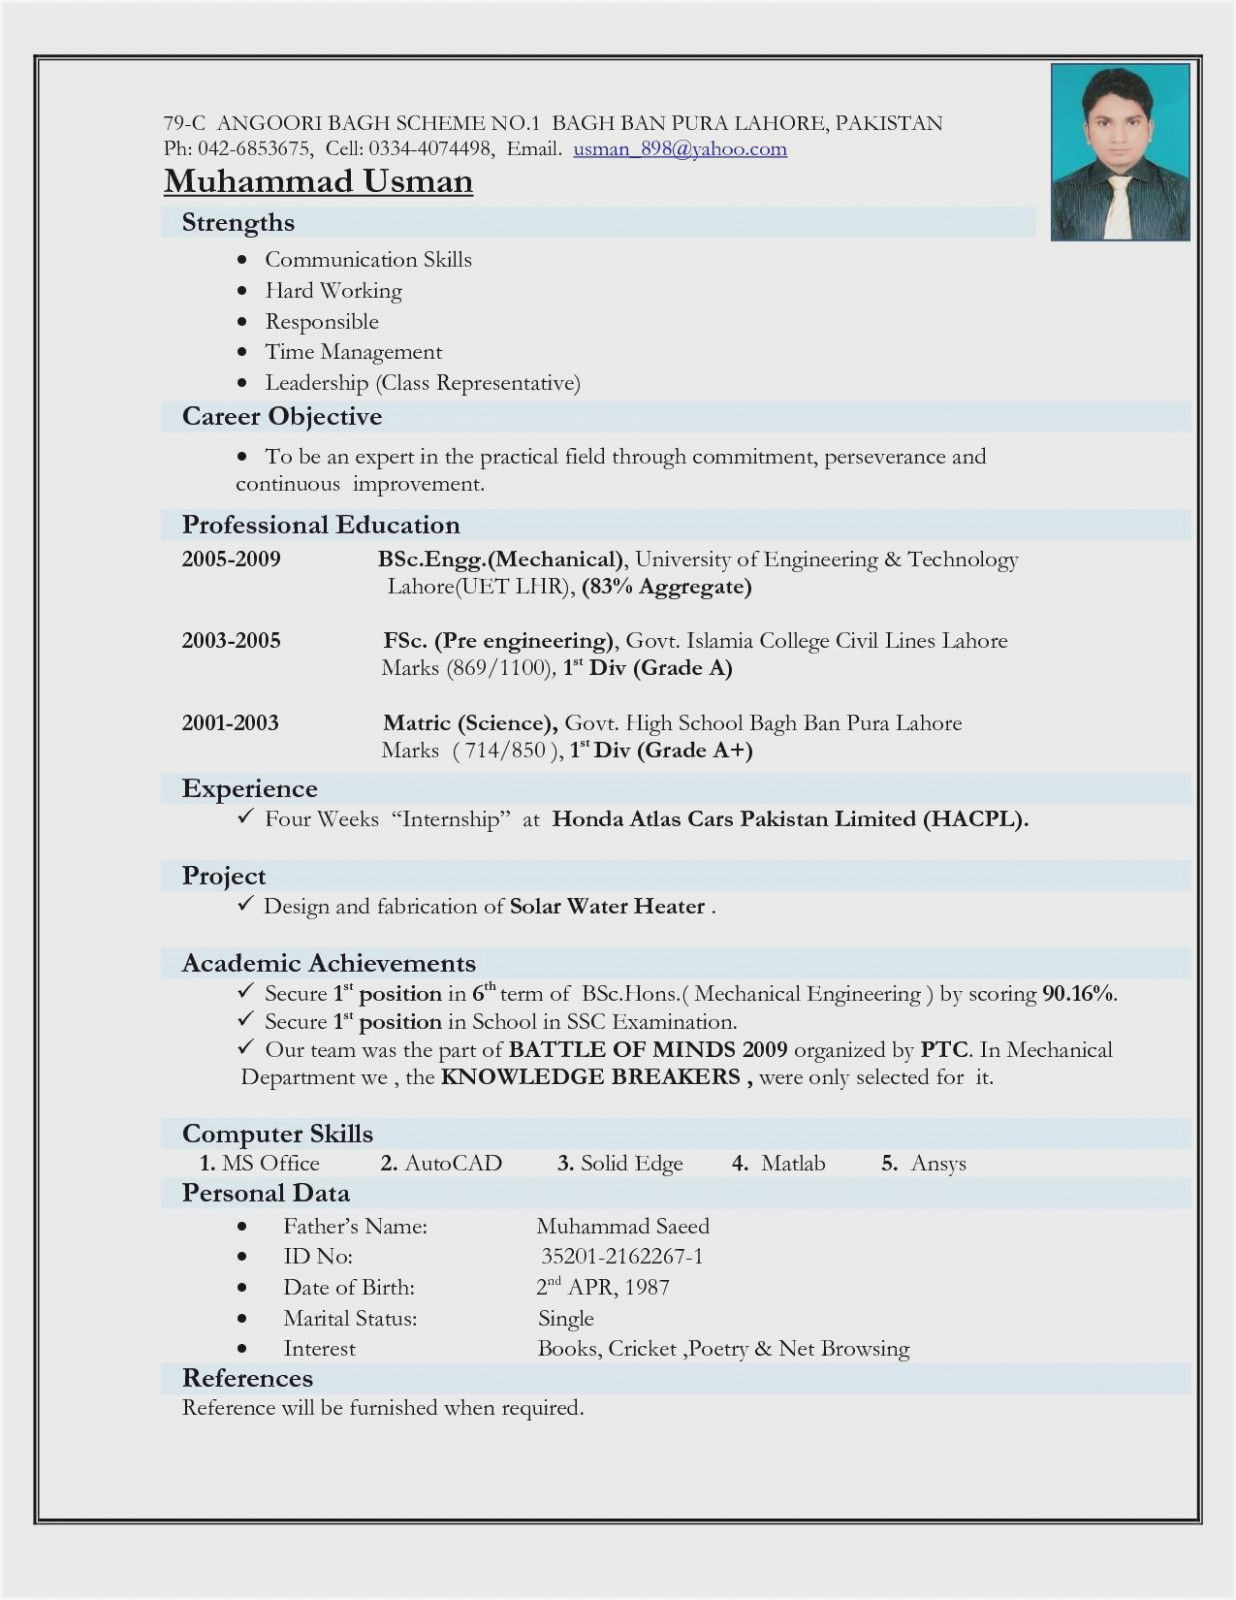 Resume Template Download for Engineering Freshers 12 Engineer Resume Template Doc Job Resume format, Resume format …